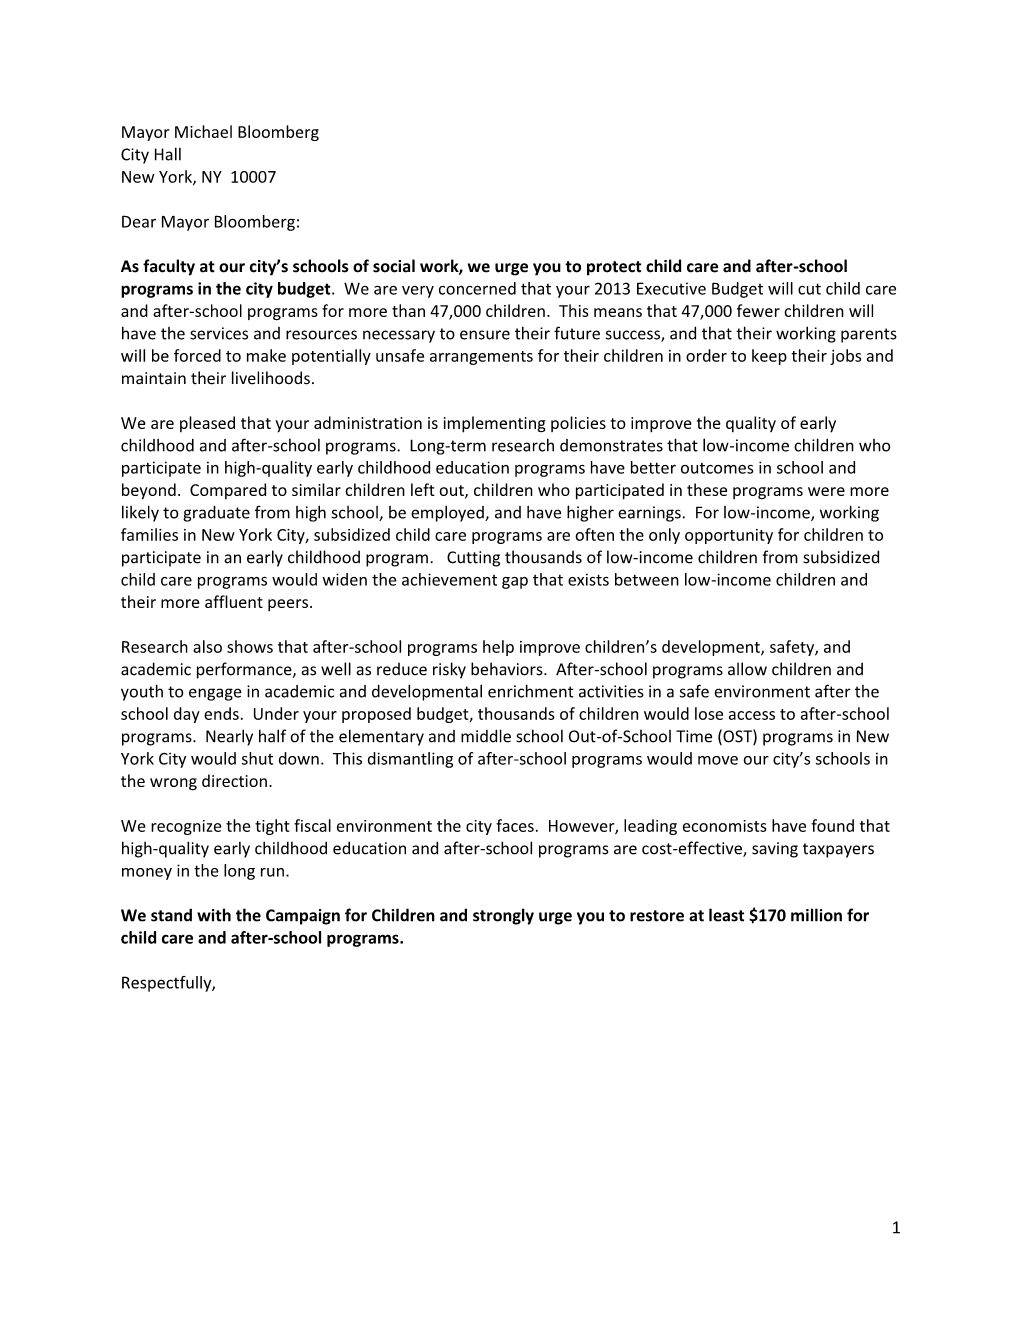 Sign-On Letter from Social Work Faculty to Save Child Care and After-School Programs